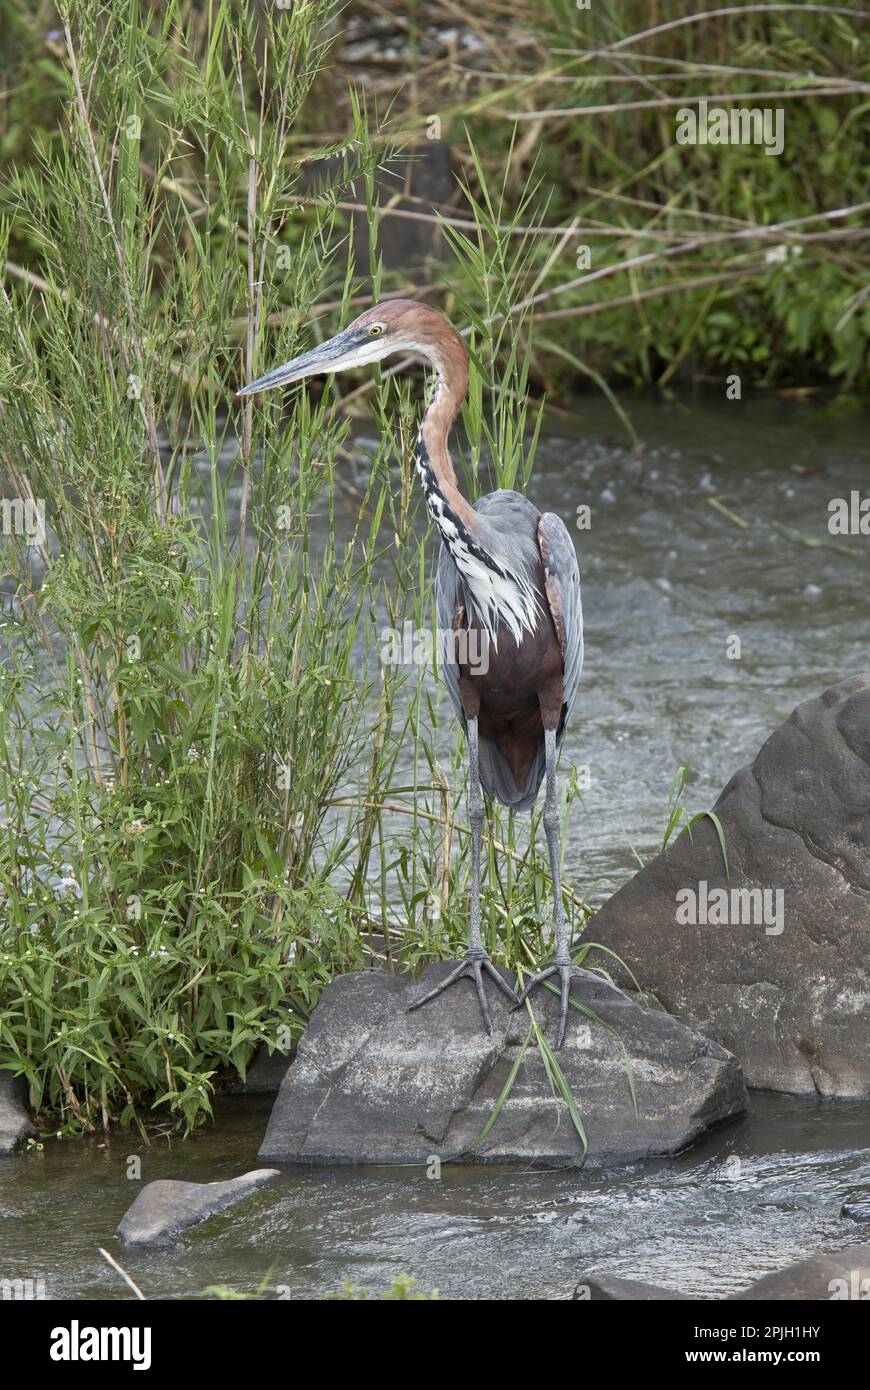 Goliath Heron (Ardea goliath) adult, standing on rock in river, Kruger N. P. Great Limpopo Transfrontier Park, South Africa Stock Photo